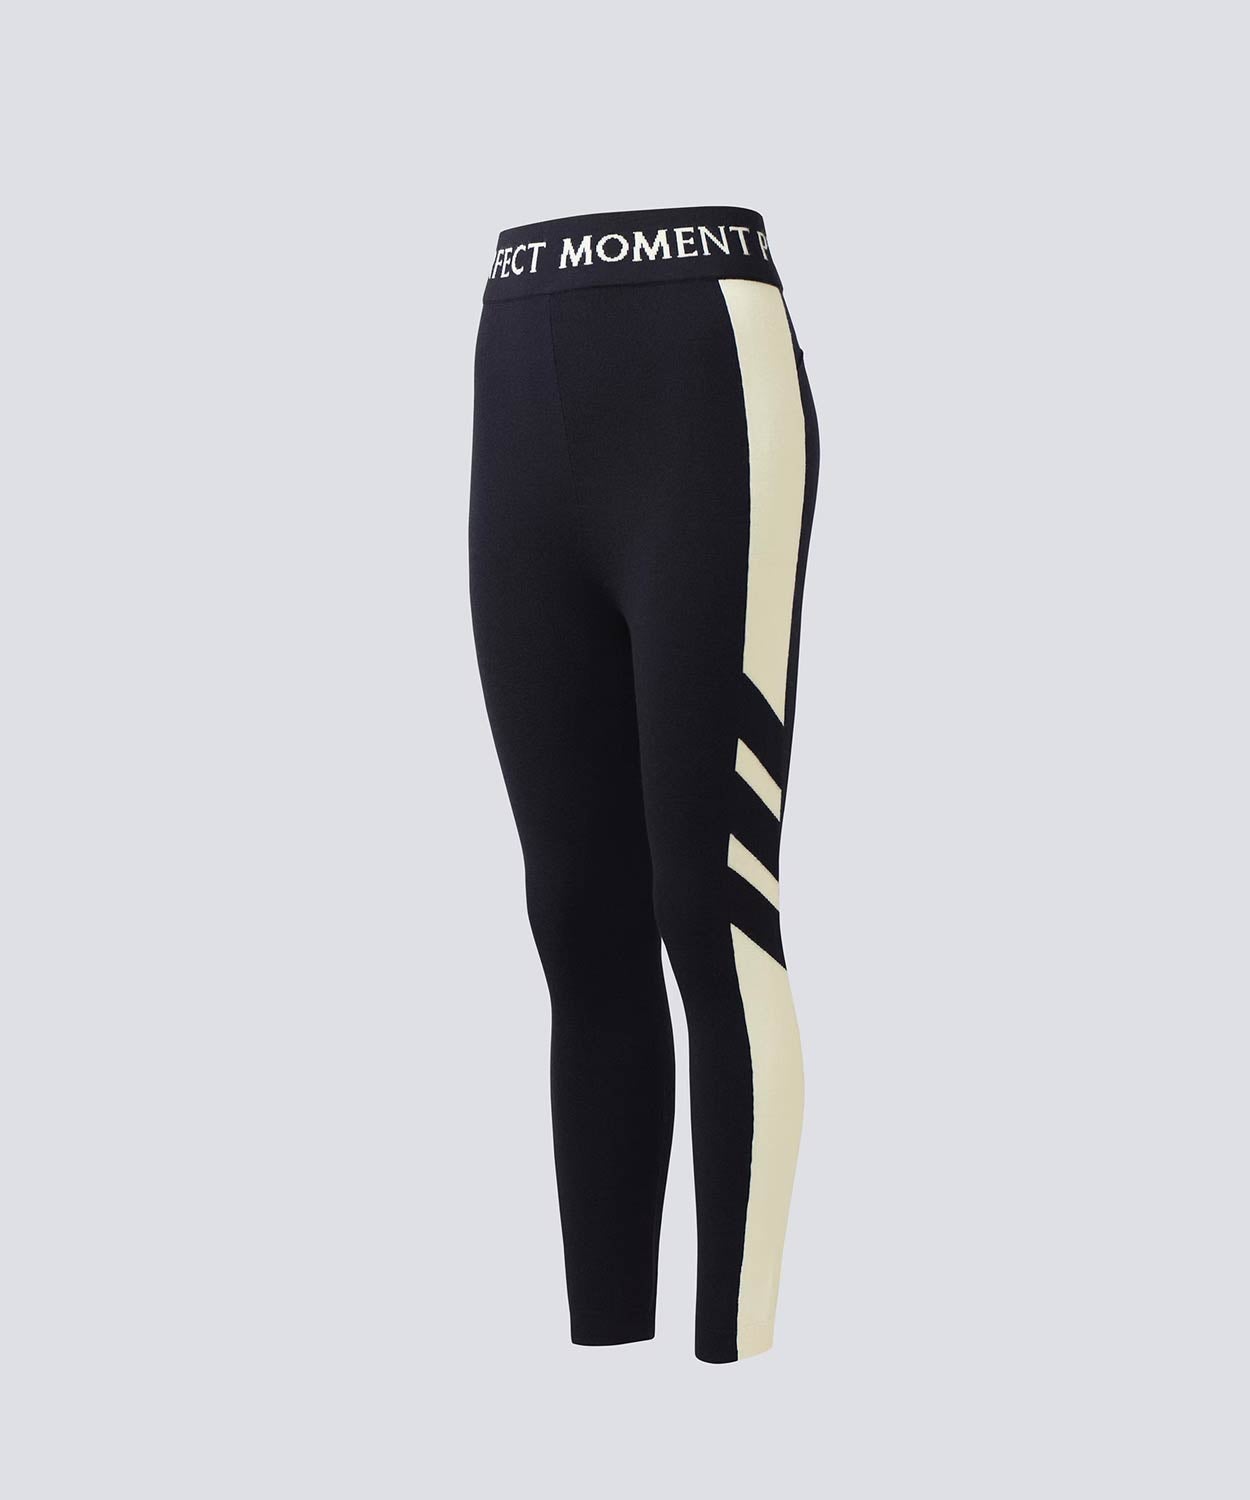 Women's Mania Bottom Base Layers | Thermals Perfect Moment 